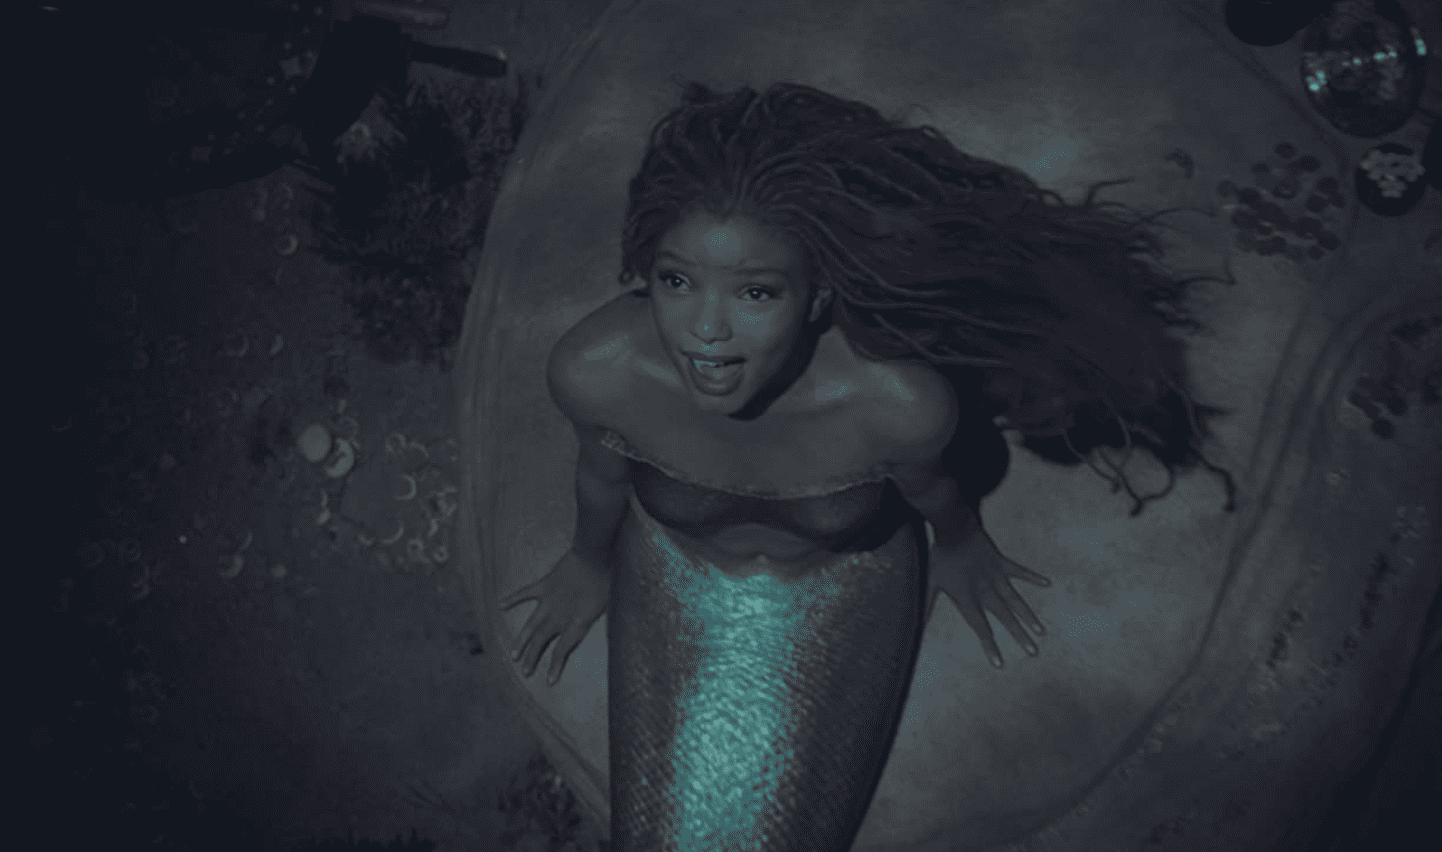 Halle Bailey as Ariel singing from the bottom of the ocean in this image from Walt Disney Studios Motion Pictures